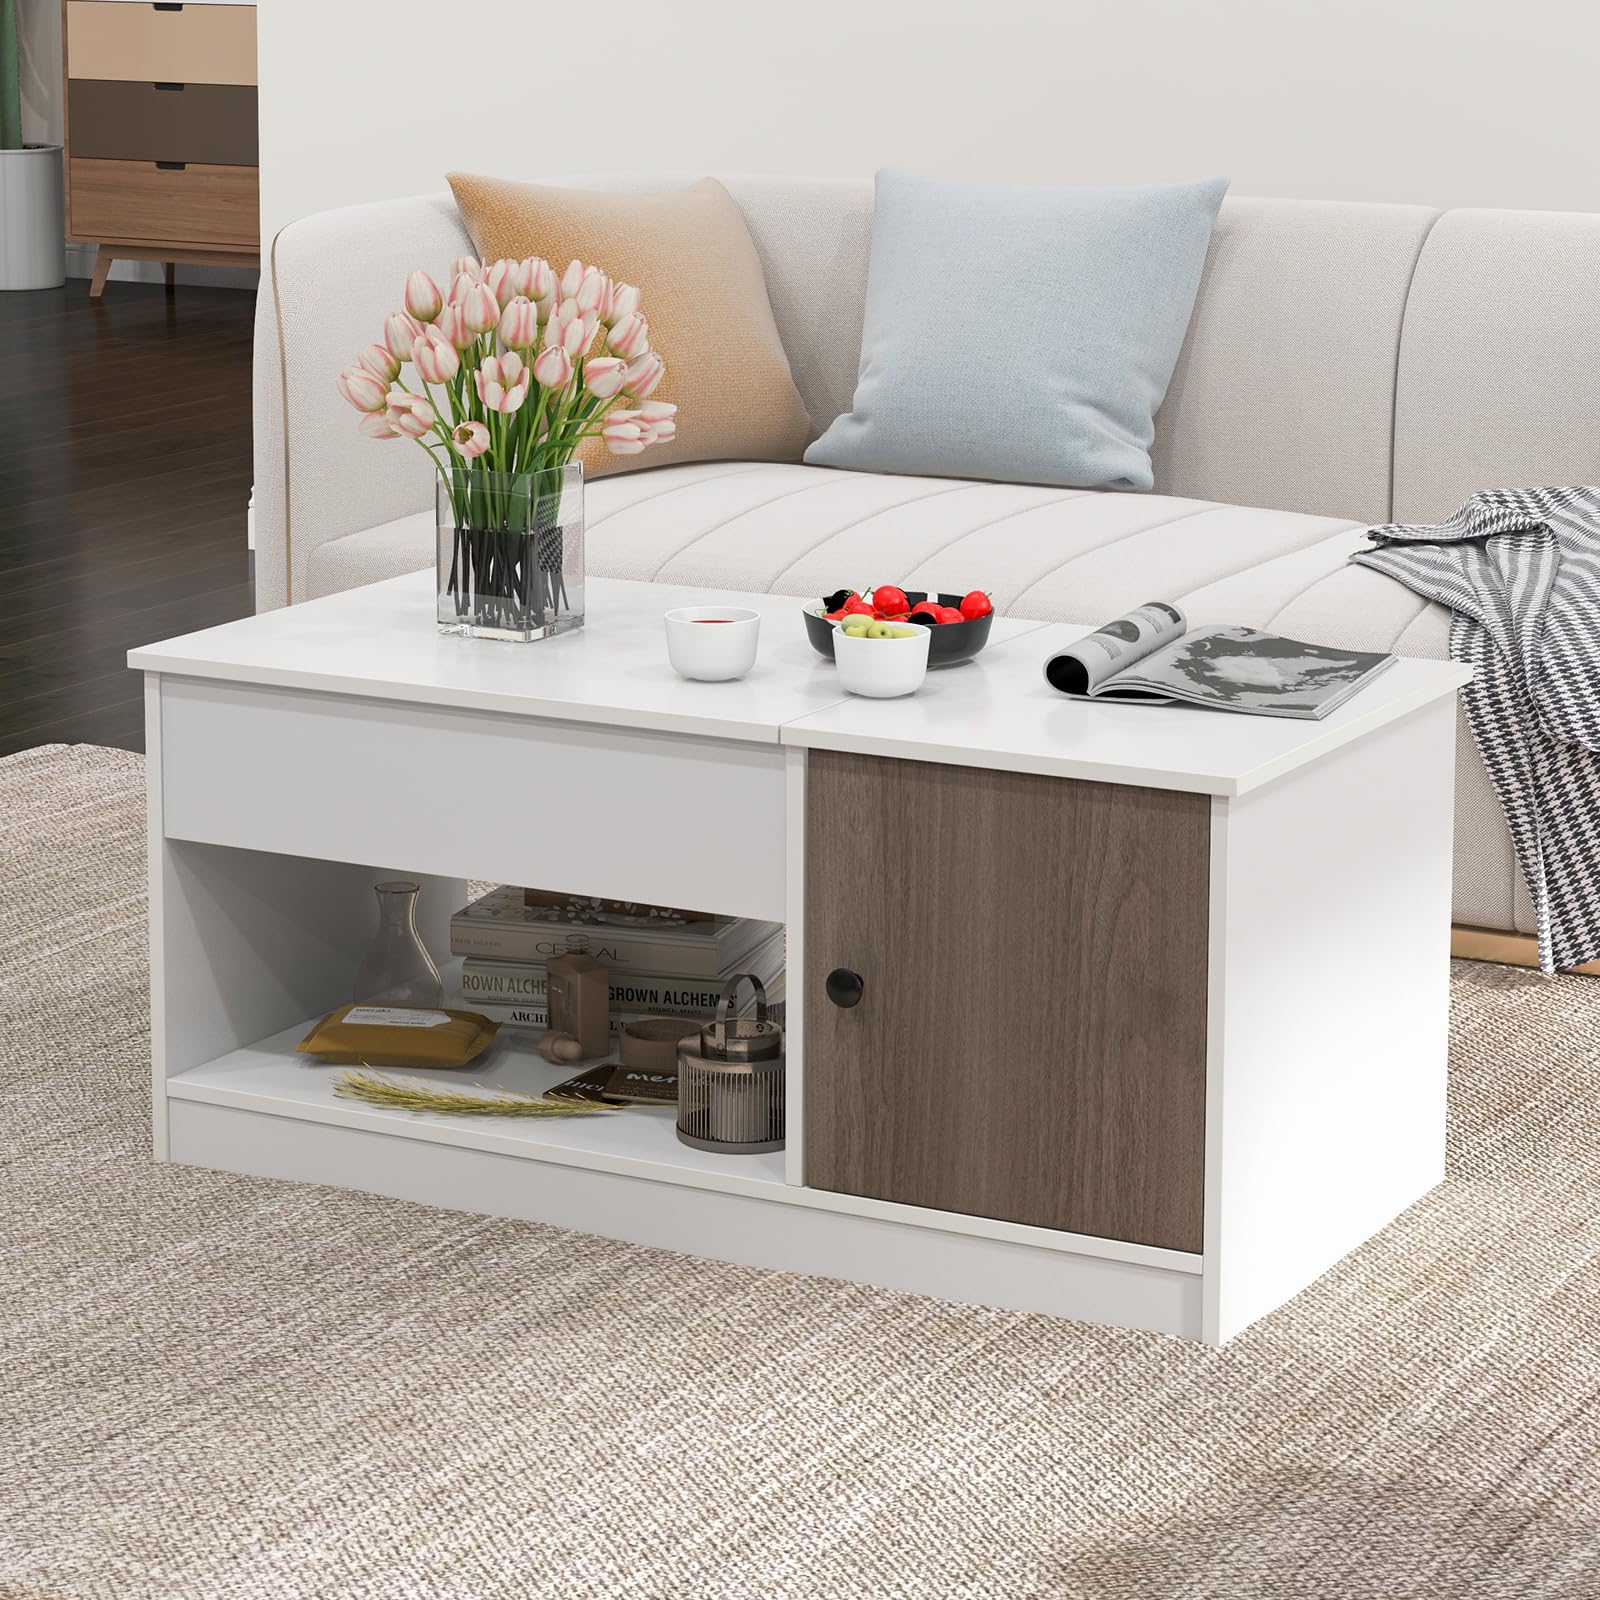 Giantex Lift-Top Coffee Table, Modern Center Table w/Lift Tabletop, Open & Hideaway Compartments